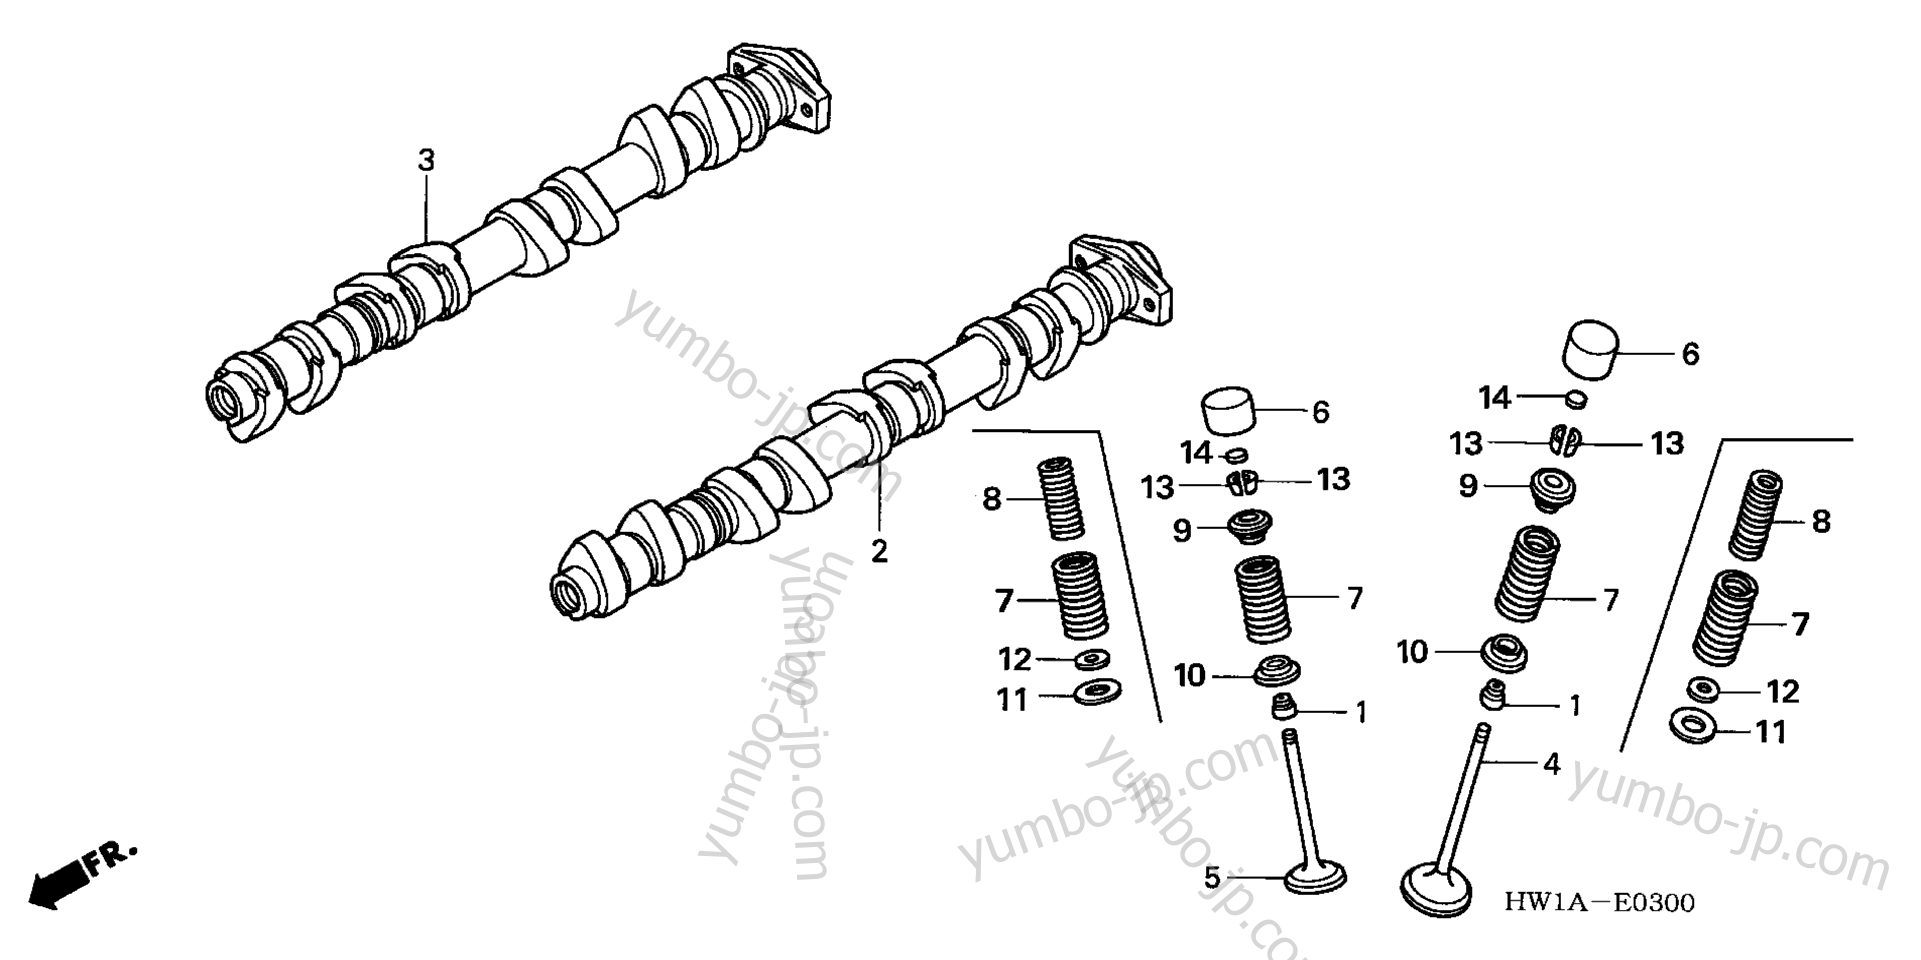 CAMSHAFT / VALVE for watercrafts HONDA ARX1200T3 A 2006 year